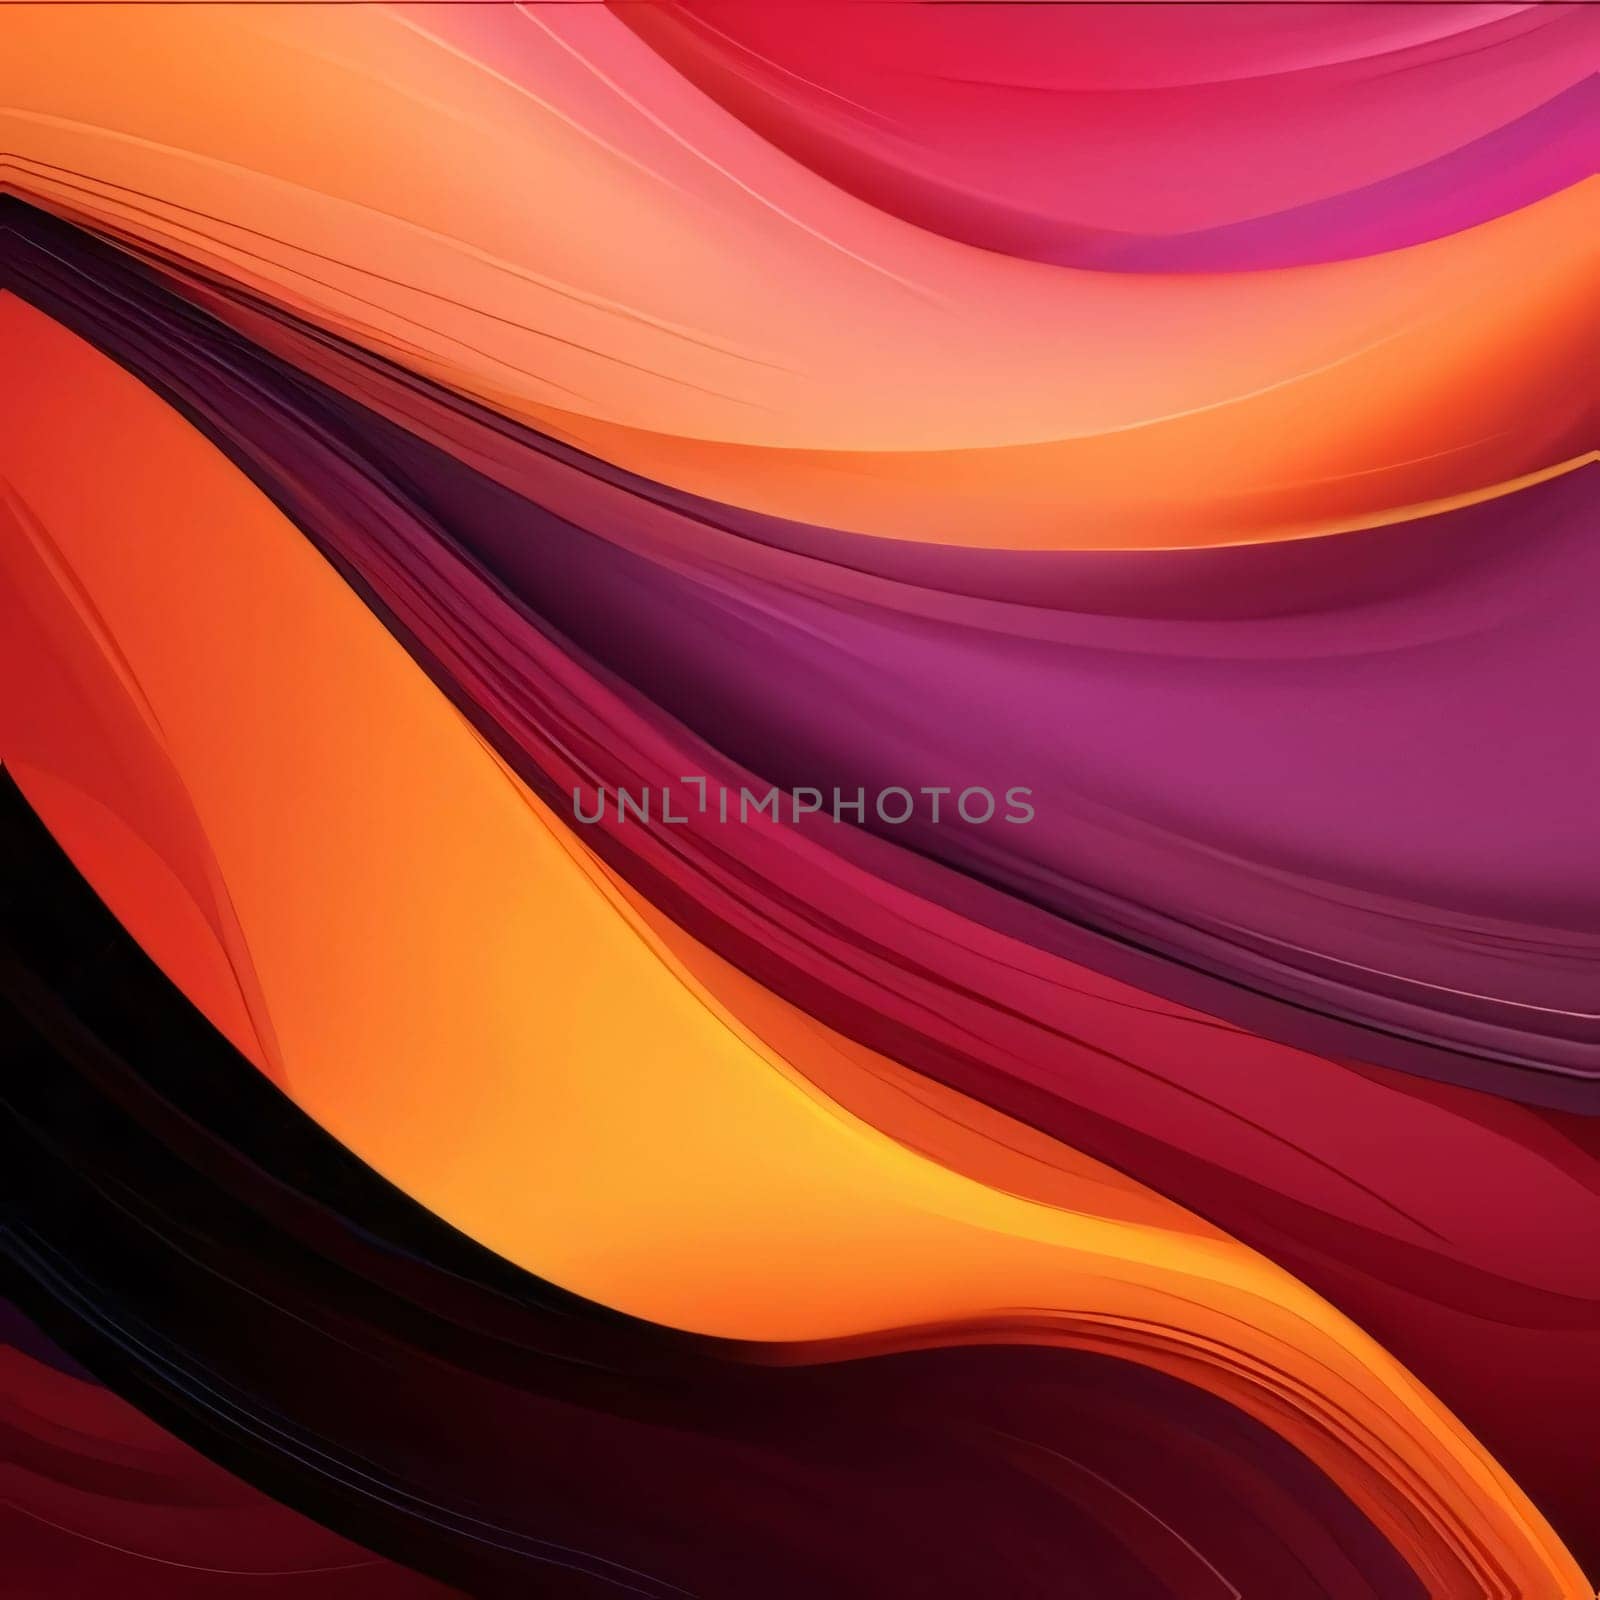 Abstract background design: abstract background with smooth lines in red, orange and yellow colors